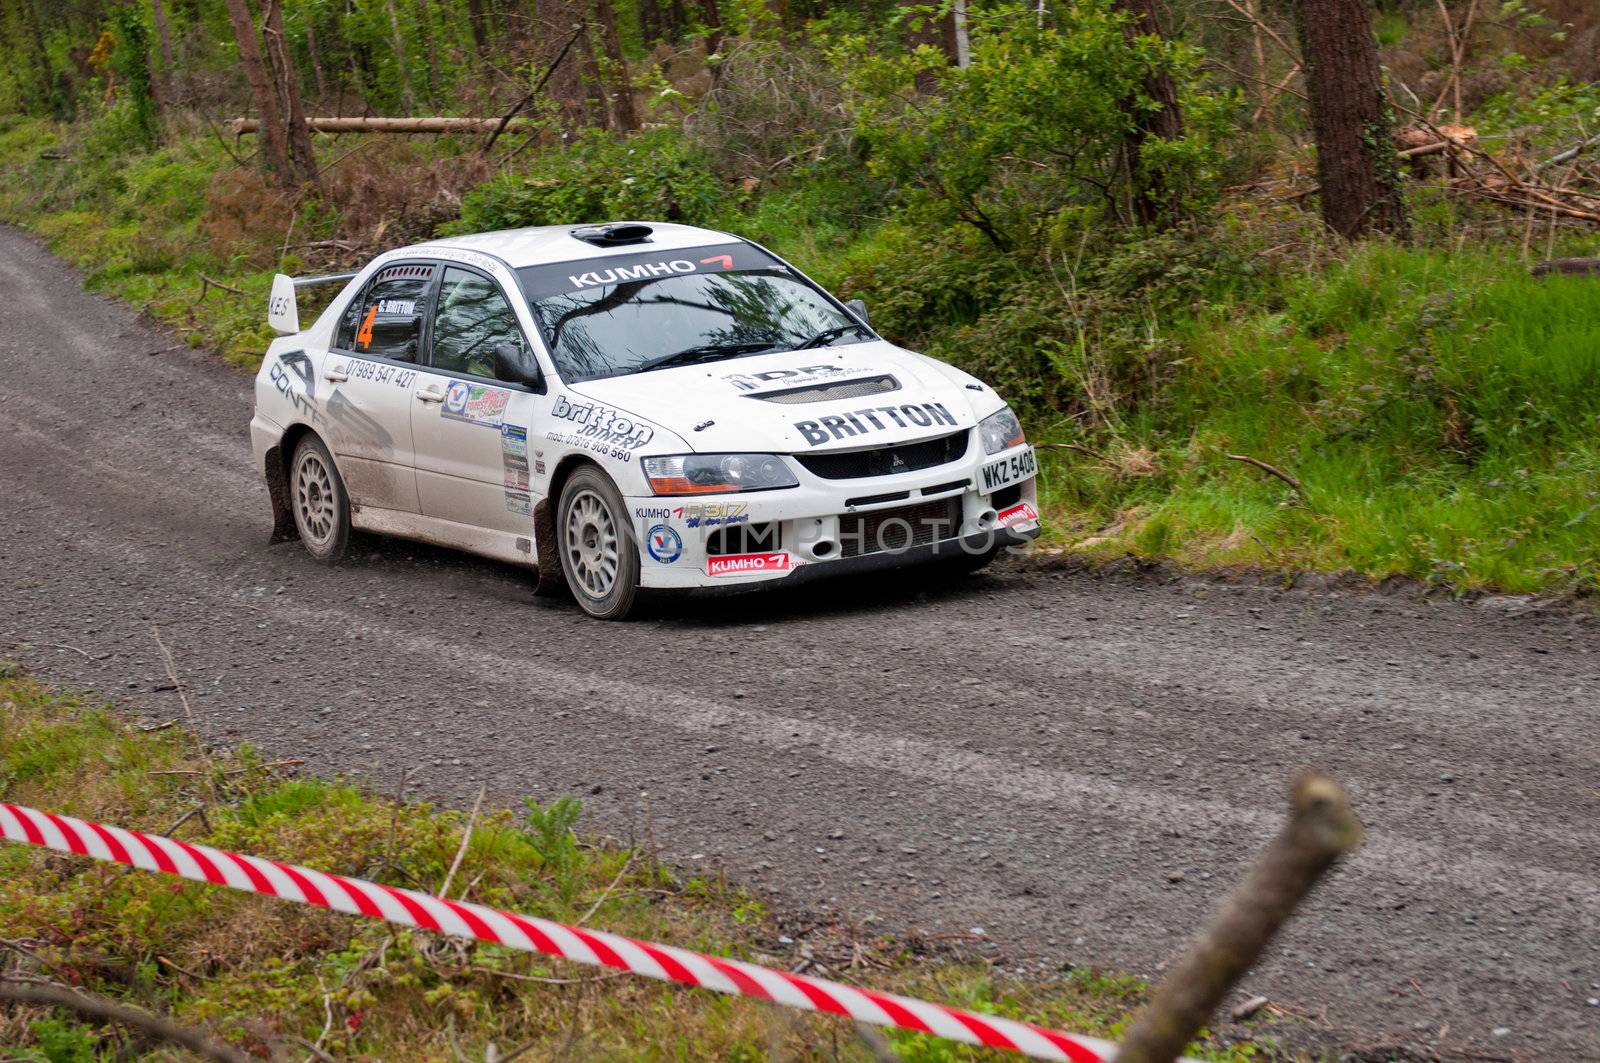 MALLOW, IRELAND - MAY 19: C. Britton driving Subaru Impreza at the Jim Walsh Cork Forest Rally on May 19, 2012 in Mallow, Ireland. 4th round of the Valvoline National Forest Rally Championship.